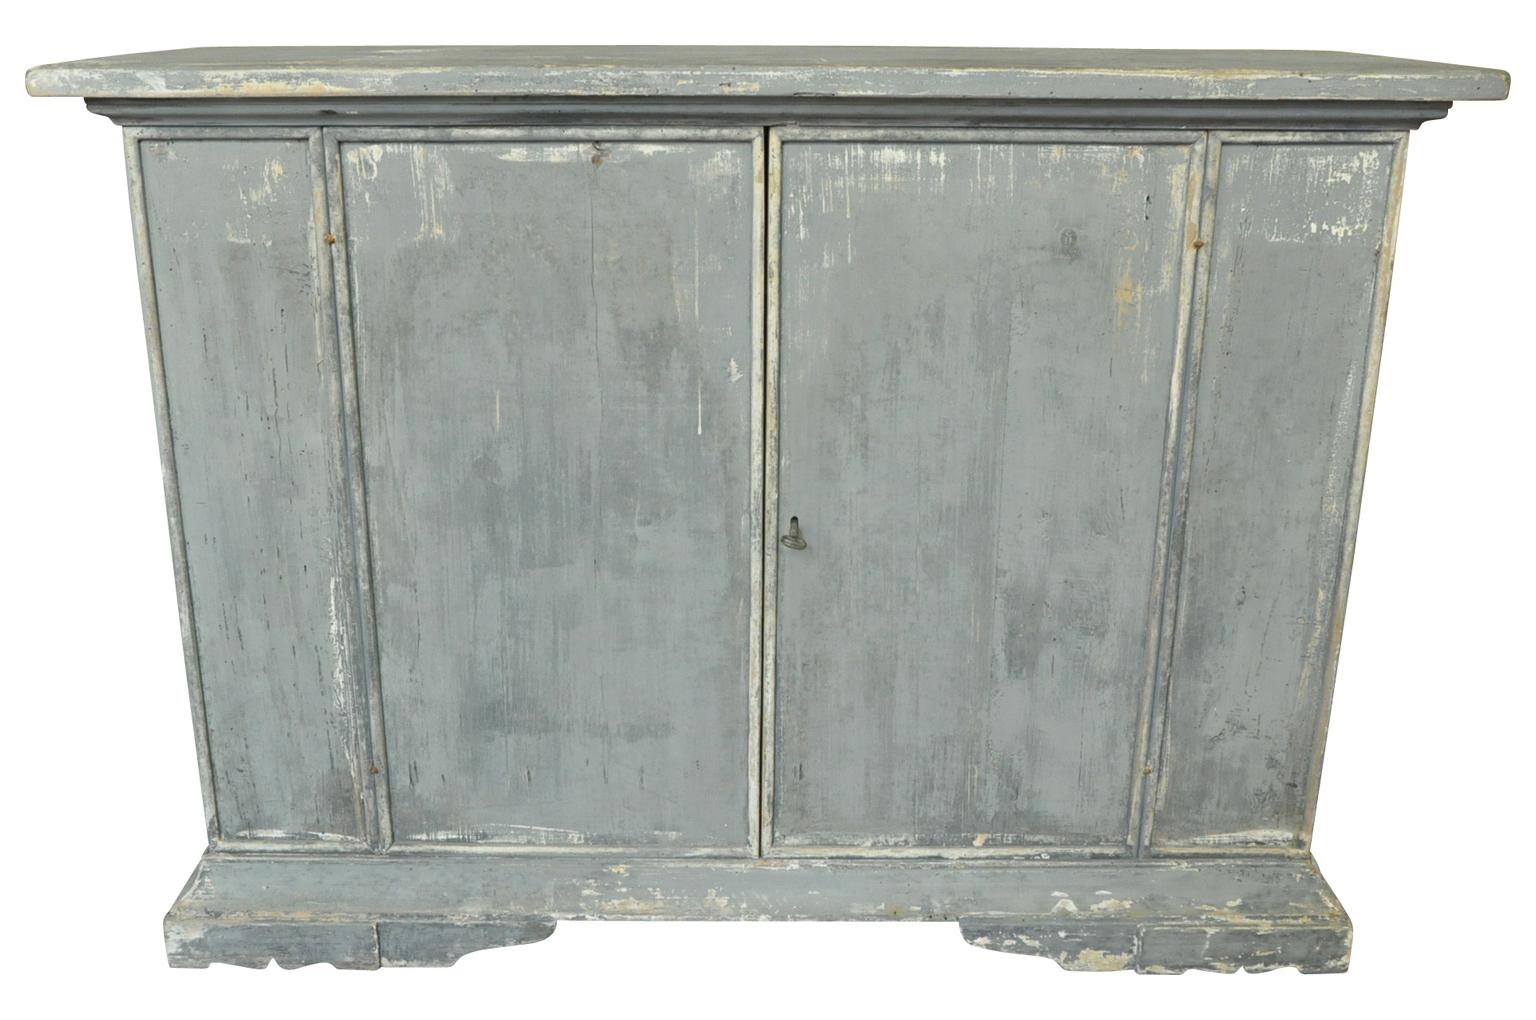 A very handsome 19th century buffet constructed from painted antique wood. Wonderful patina. Great storage piece.